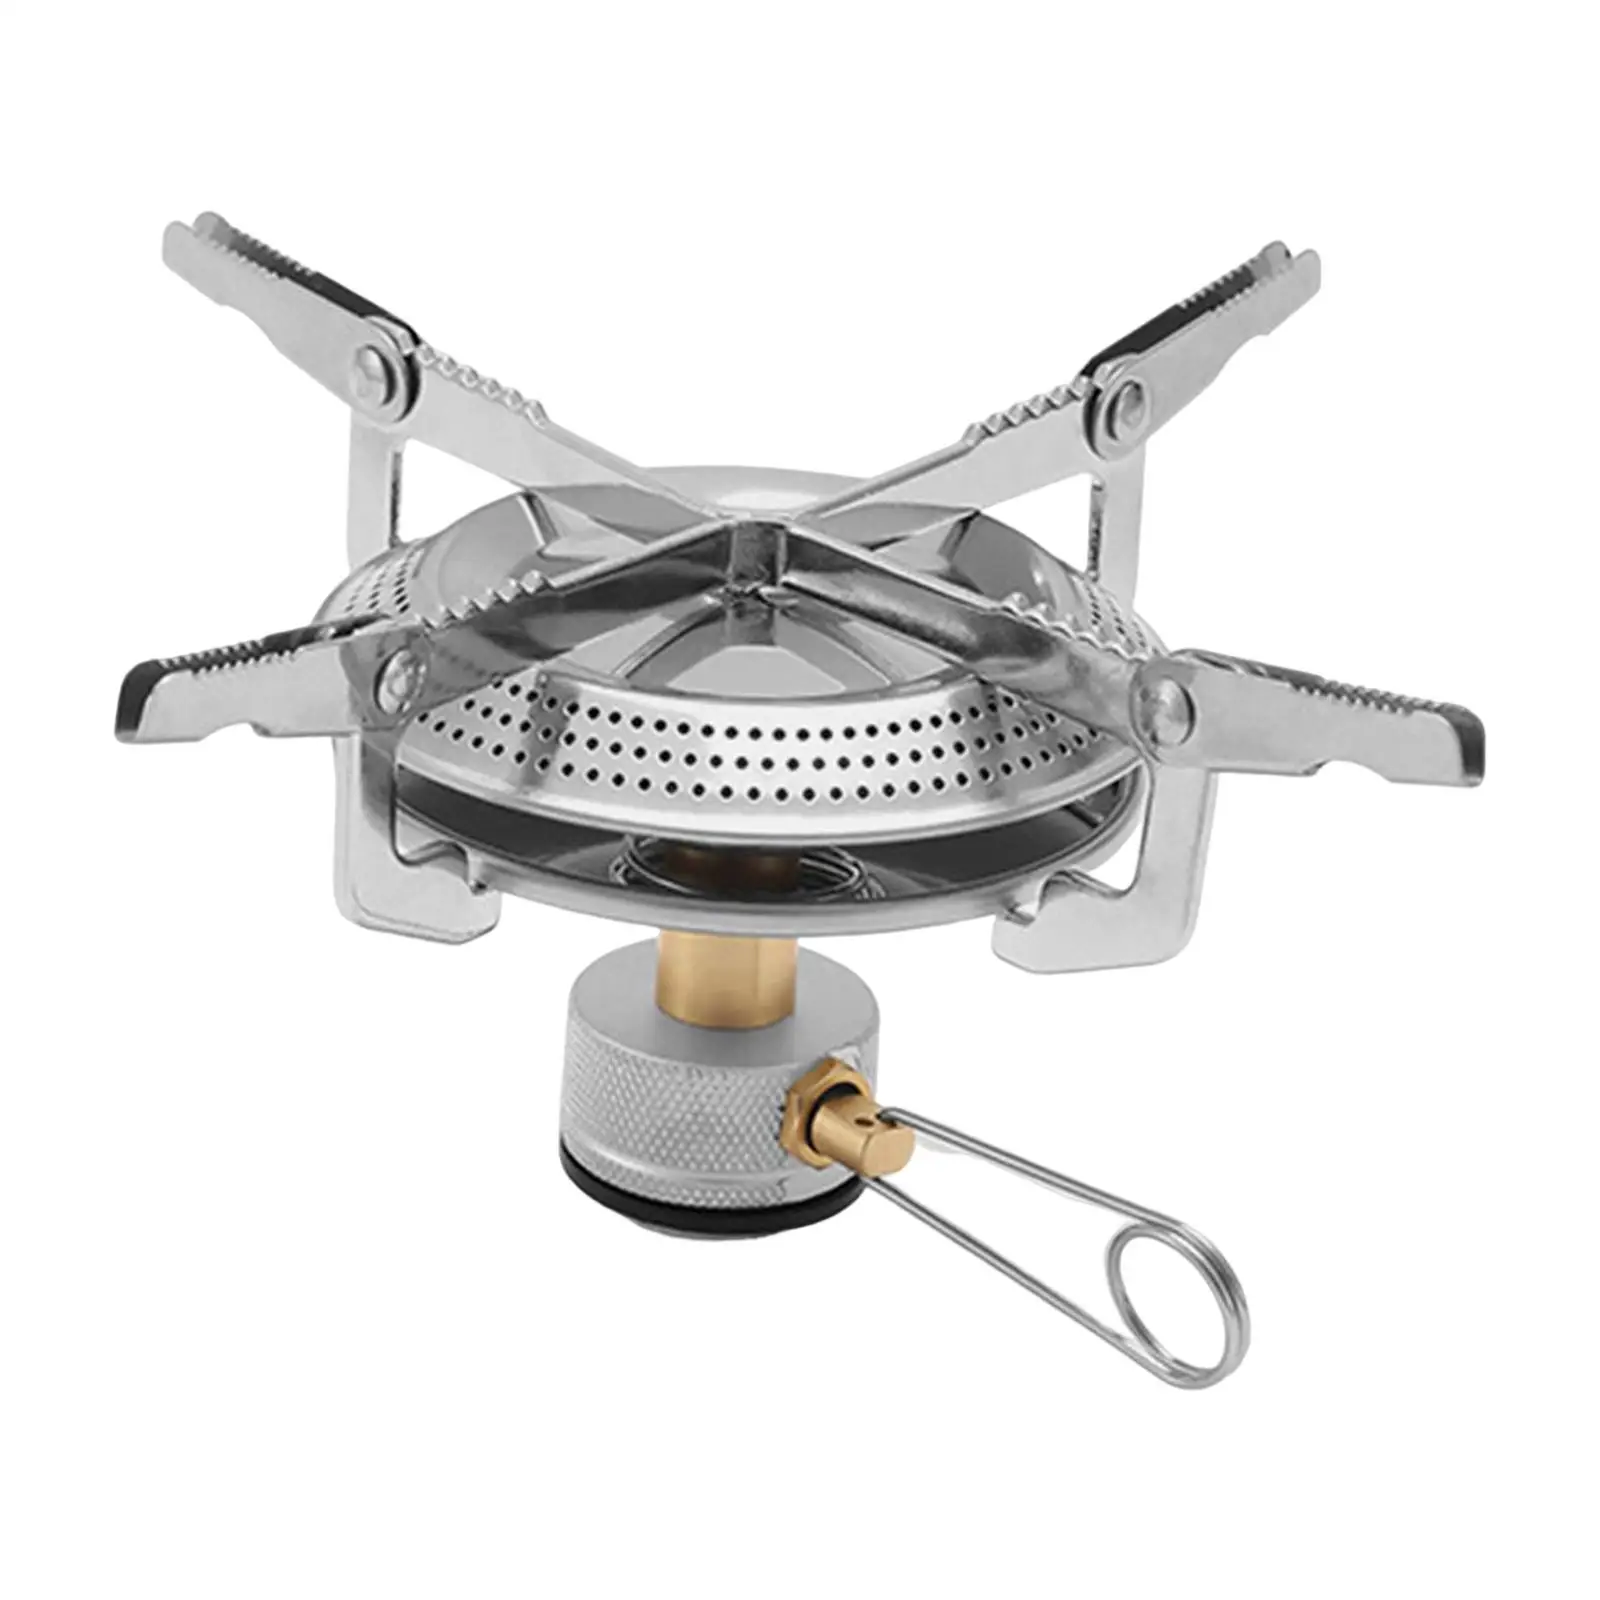 Foldable Camping Stove Outdoor Gas Burner Camp Stove for Picnic Traveling